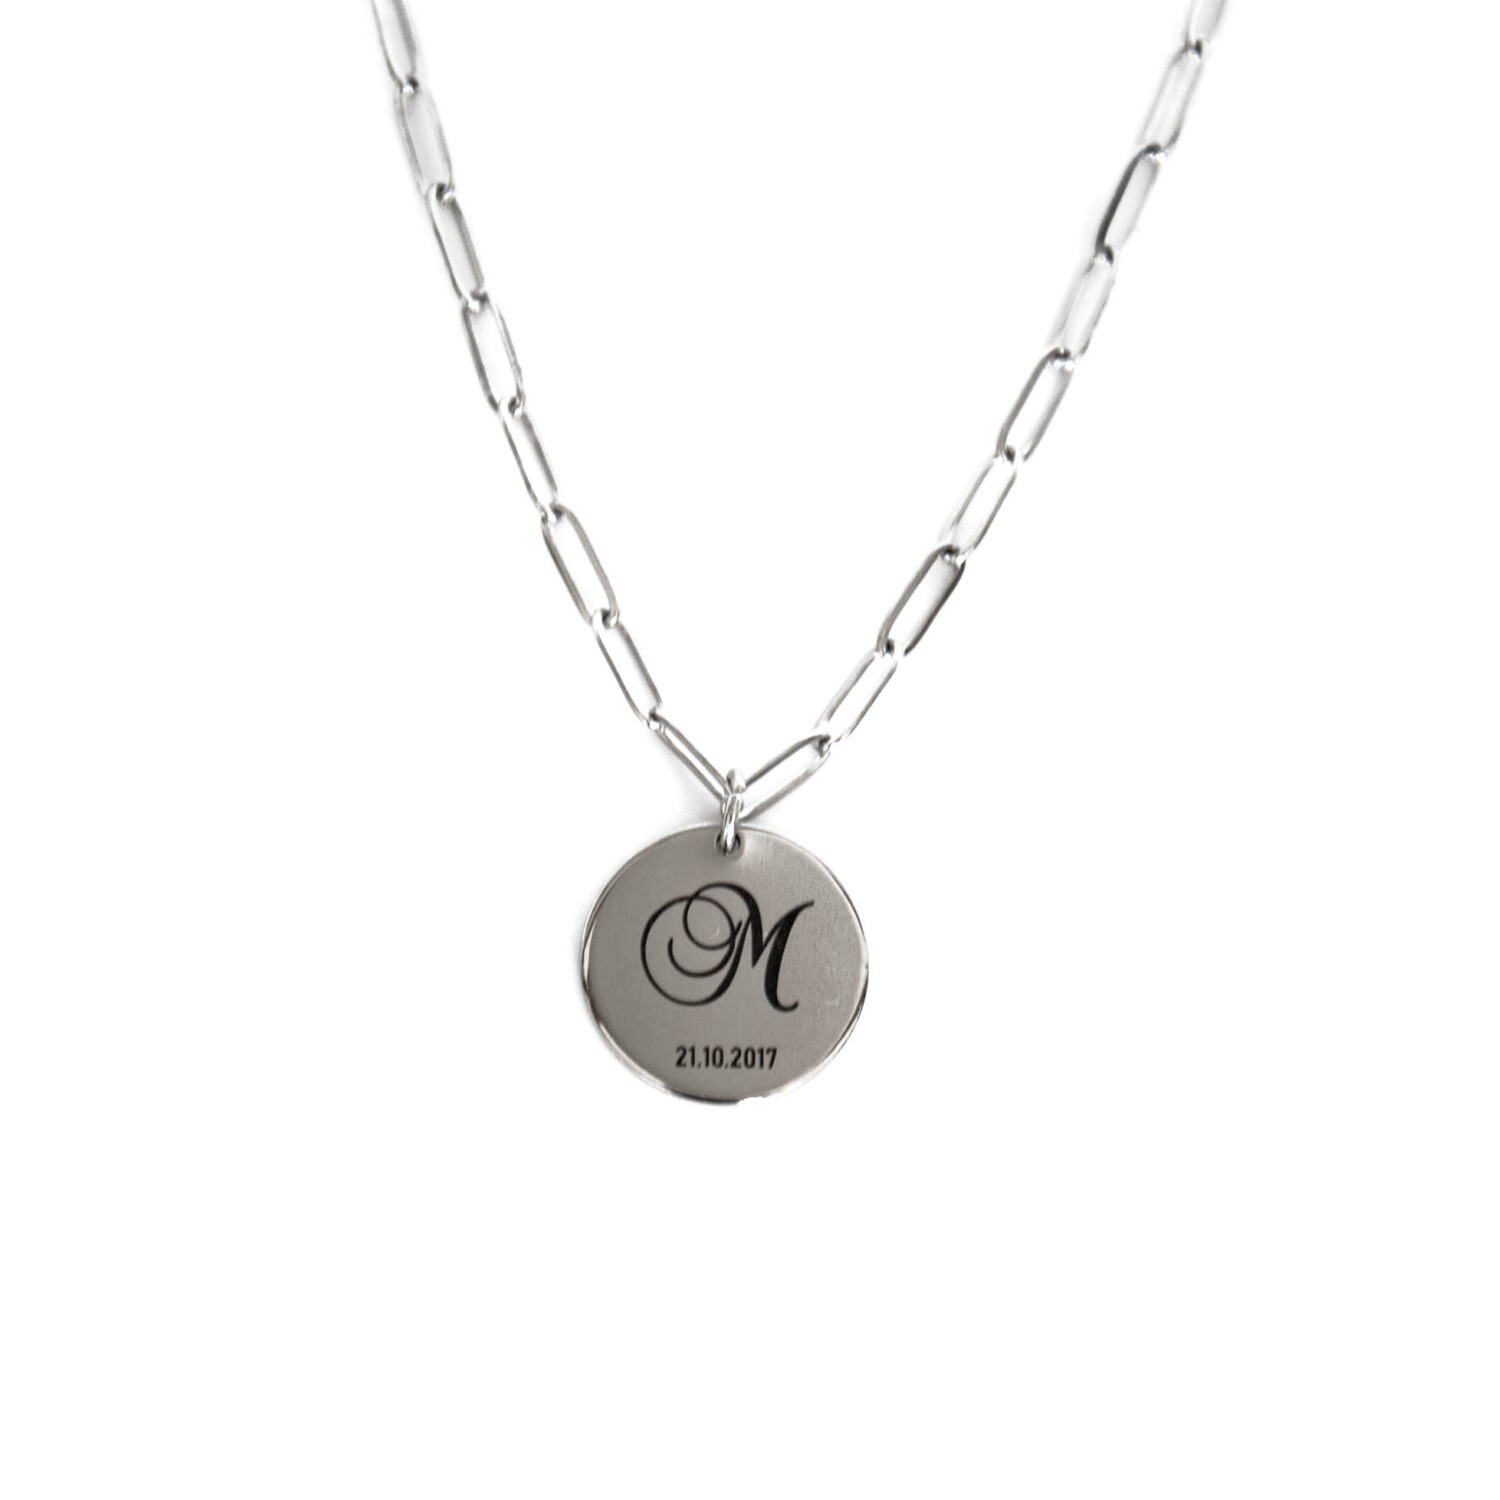 Personalised Engraved Monogram and Date Necklace